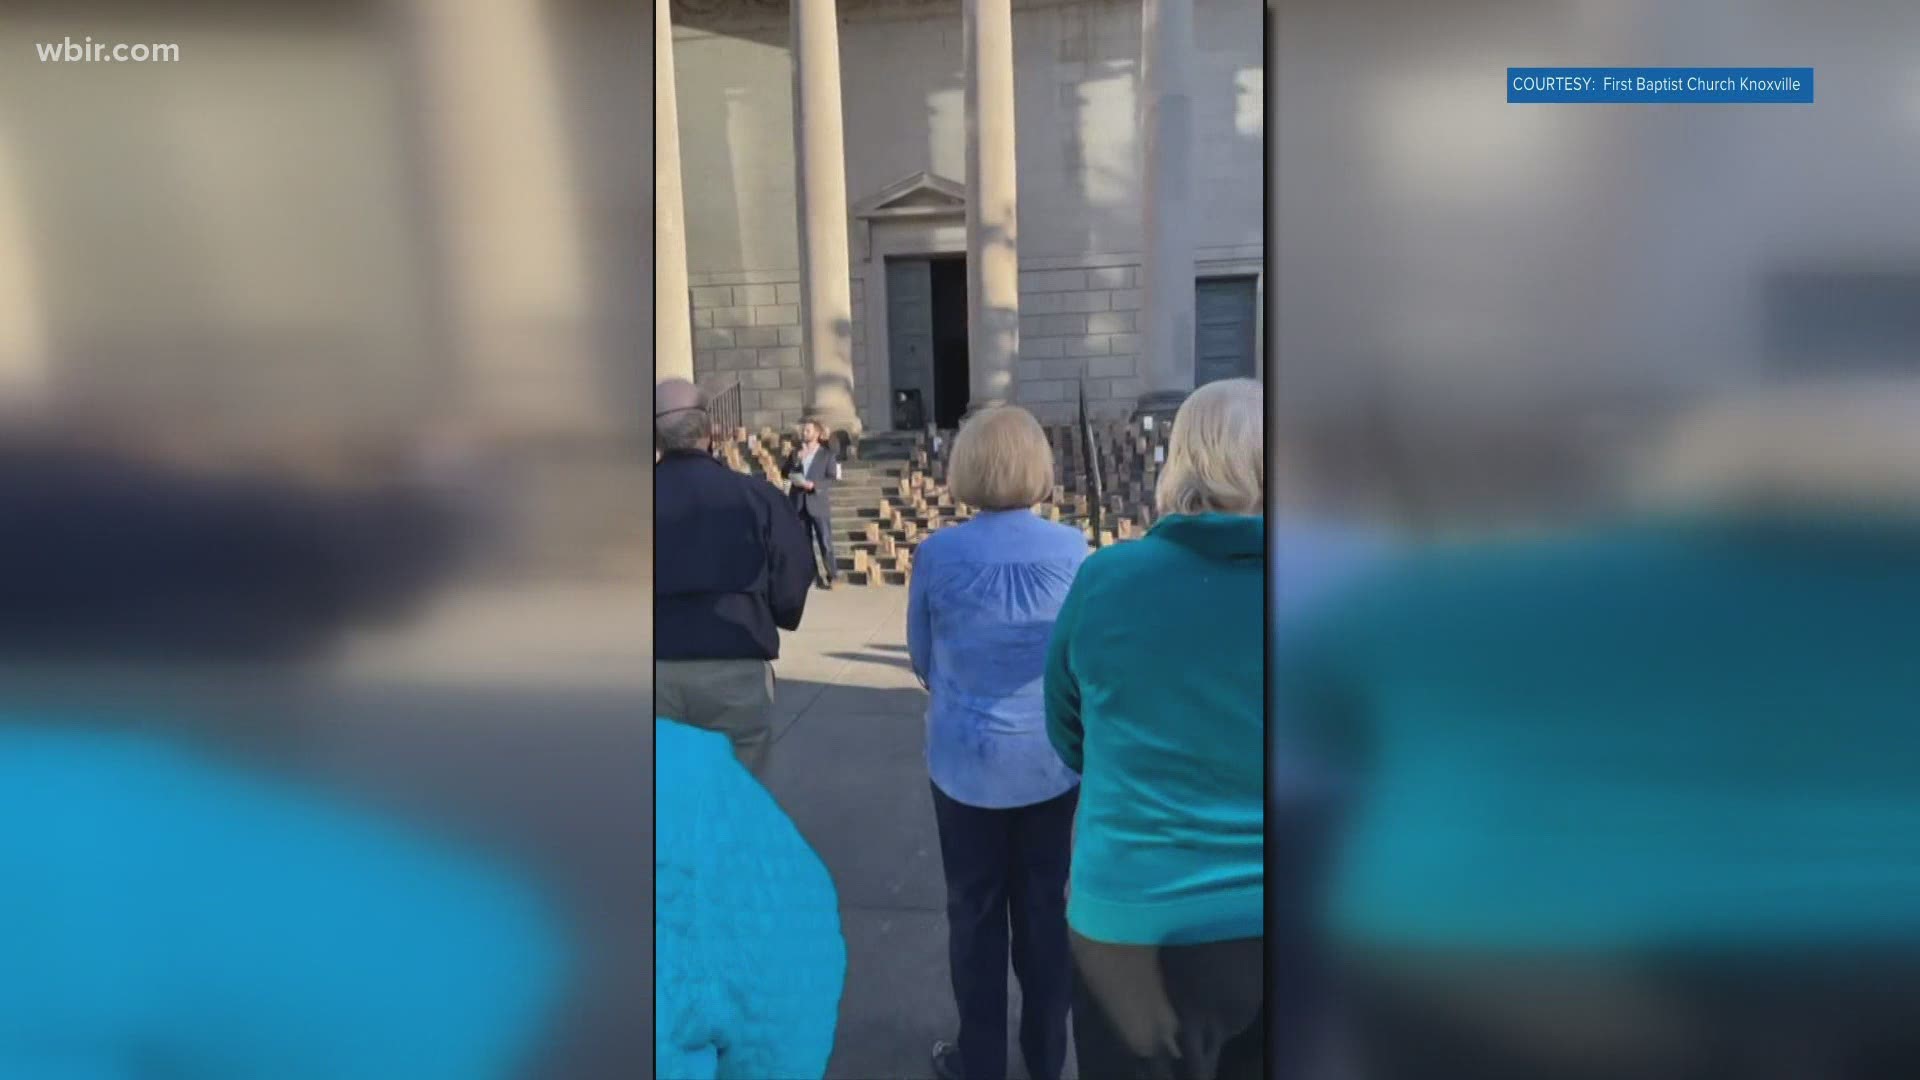 At First Baptist Church of Knoxville, people lit candles on Saturday to remember those impacted by the virus and recent gun violence across East Tennessee.